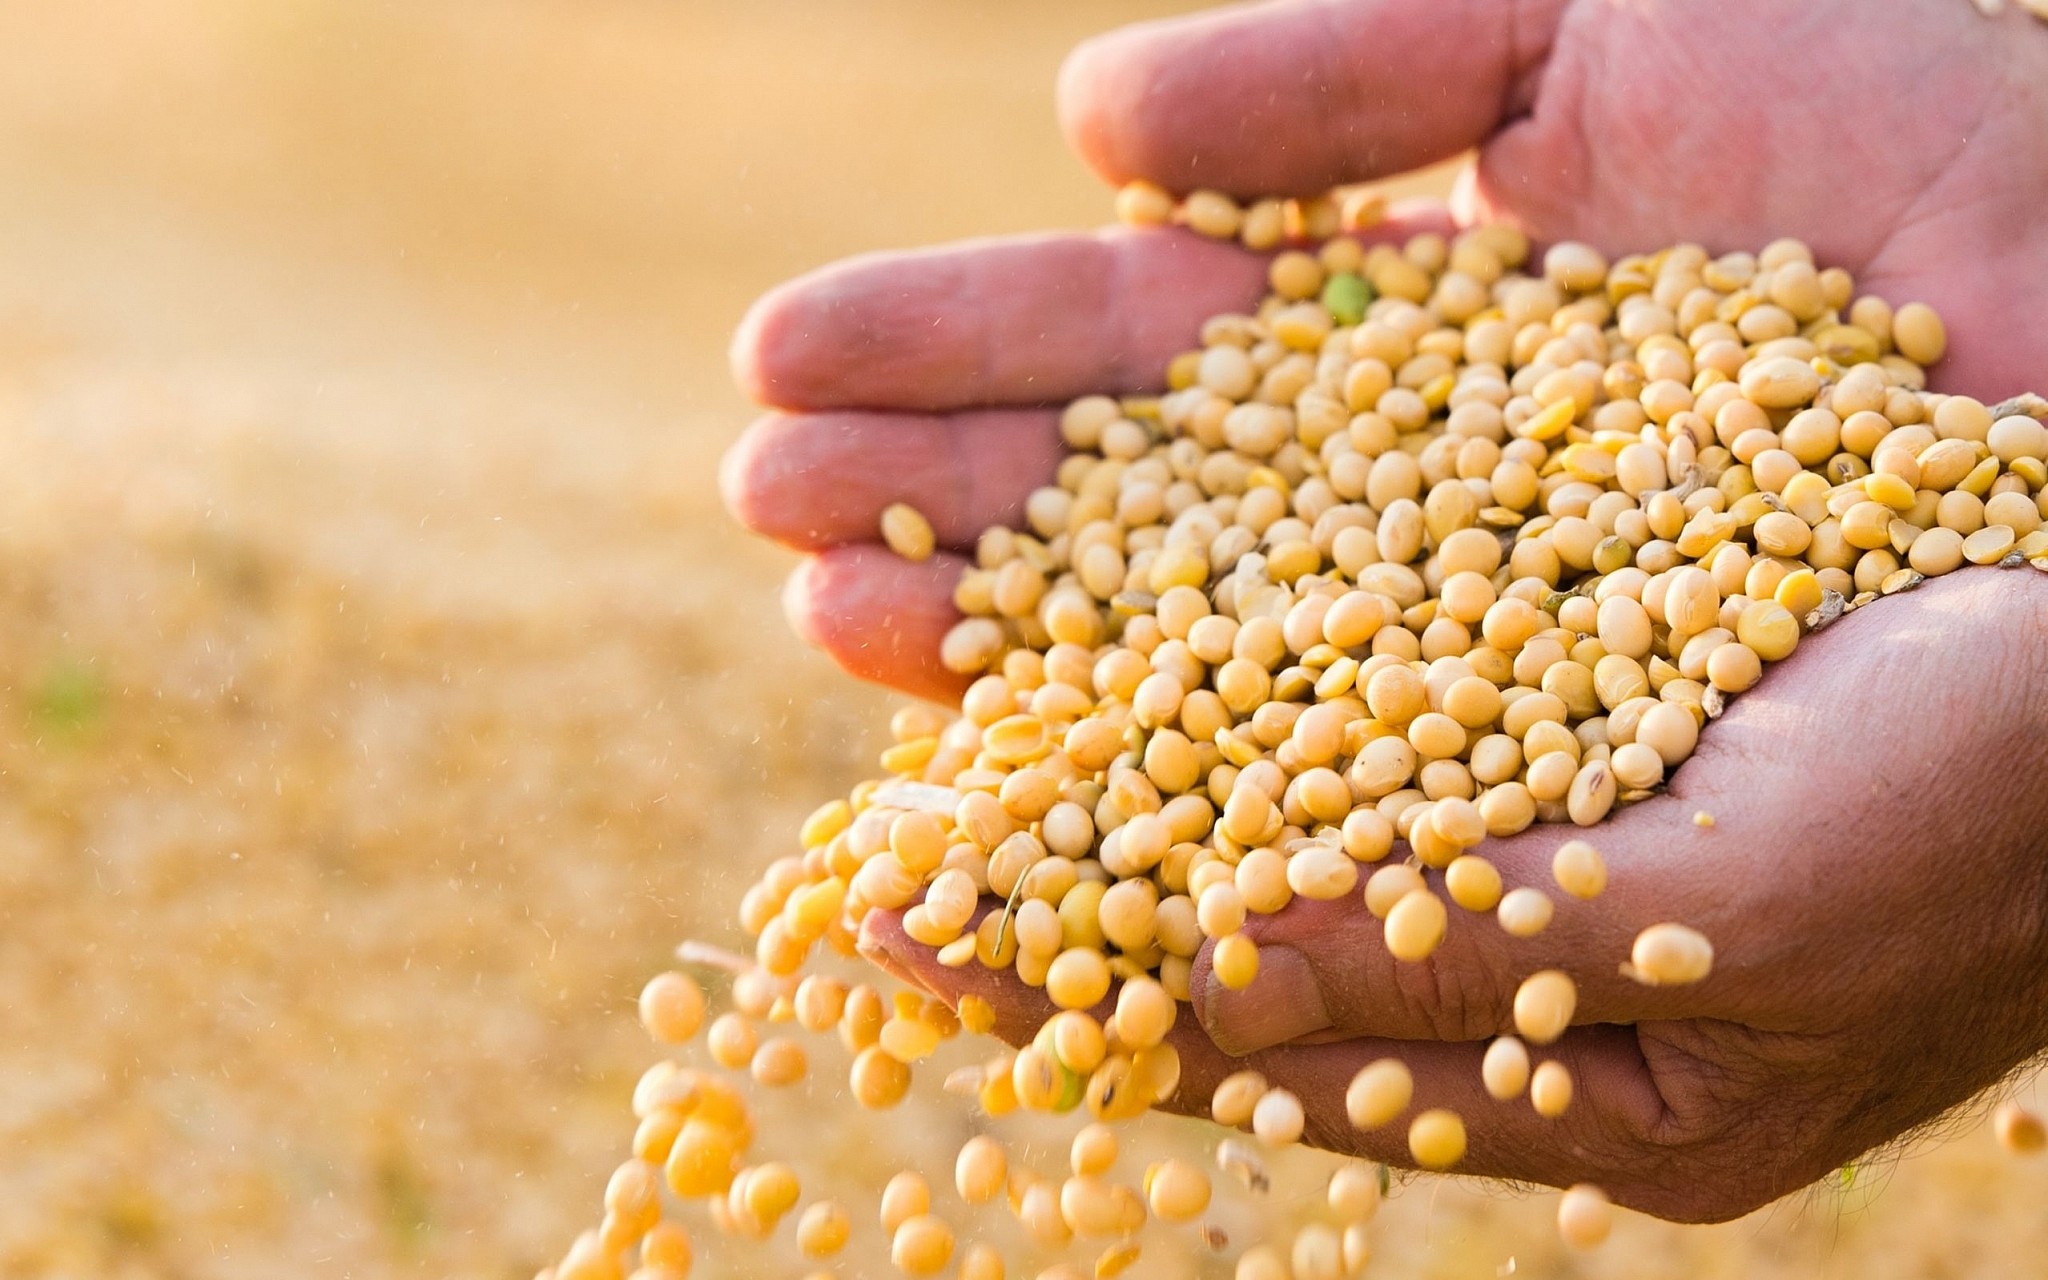 Soy Checkoff Research Shows Strong Trust in U.S. Farmers